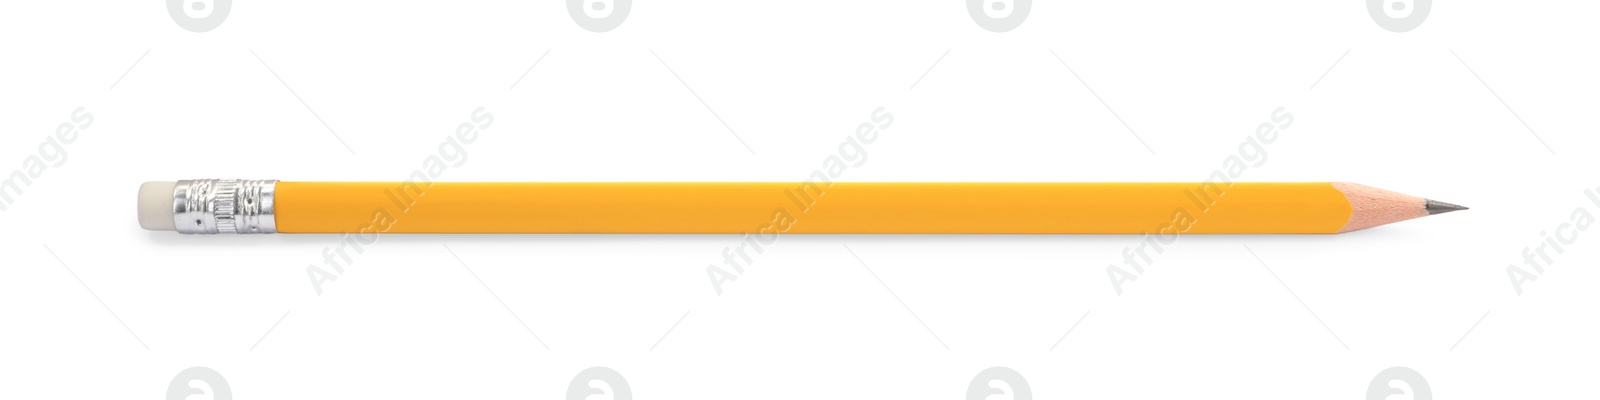 Photo of One sharp graphite pencil isolated on white